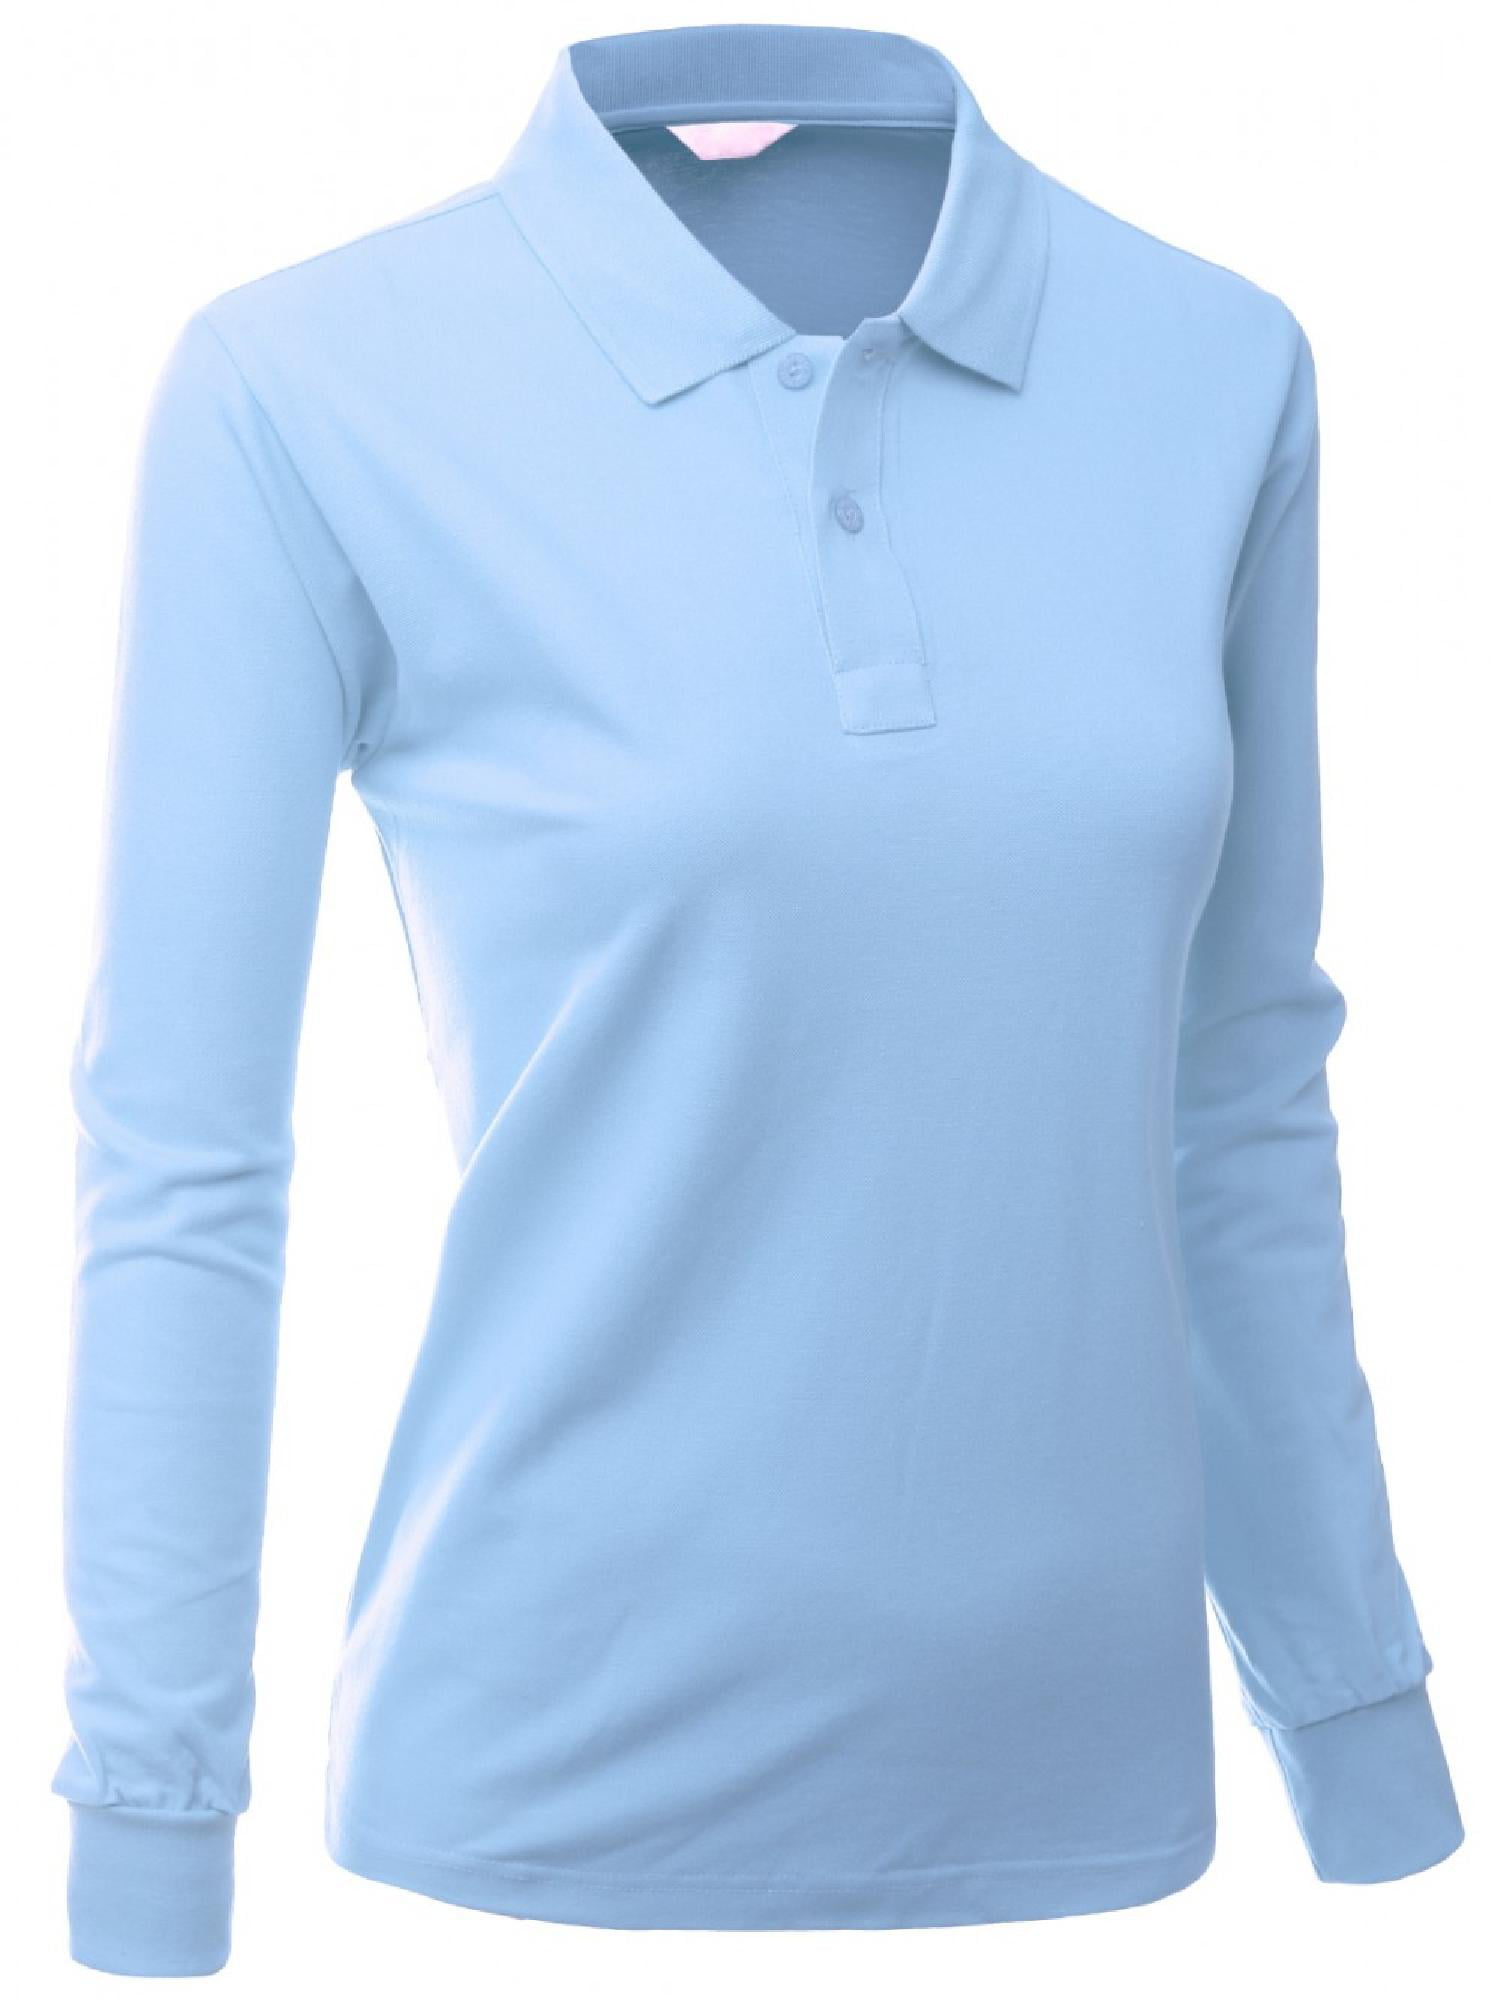 long sleeve dri fit shirts with collar